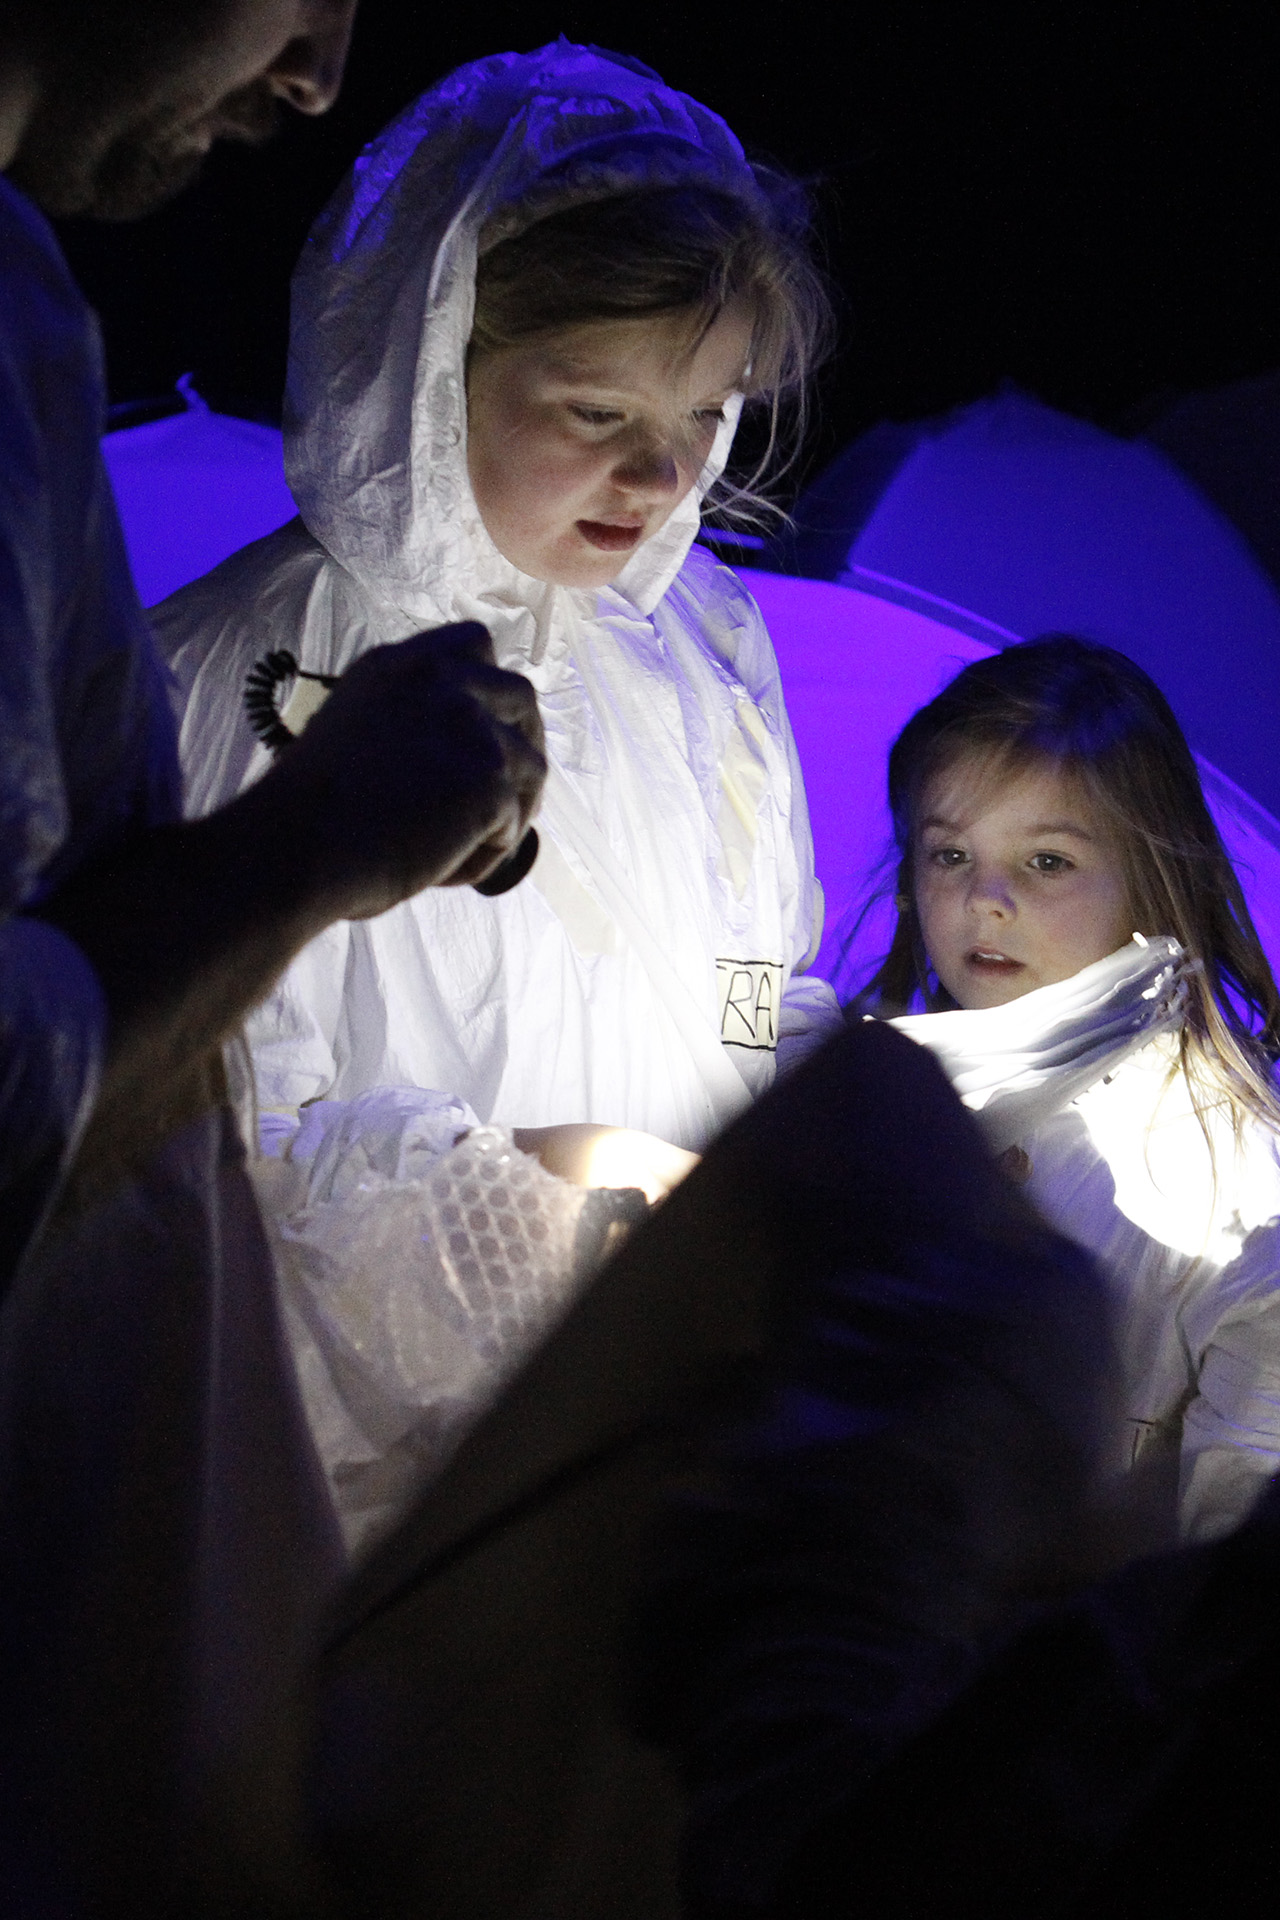 A Separation Street production photo. Two children wearing white boiler suits stand in a darkened space, looking at something illuminated by a torch/flashlight. Purple light illuminates the background.